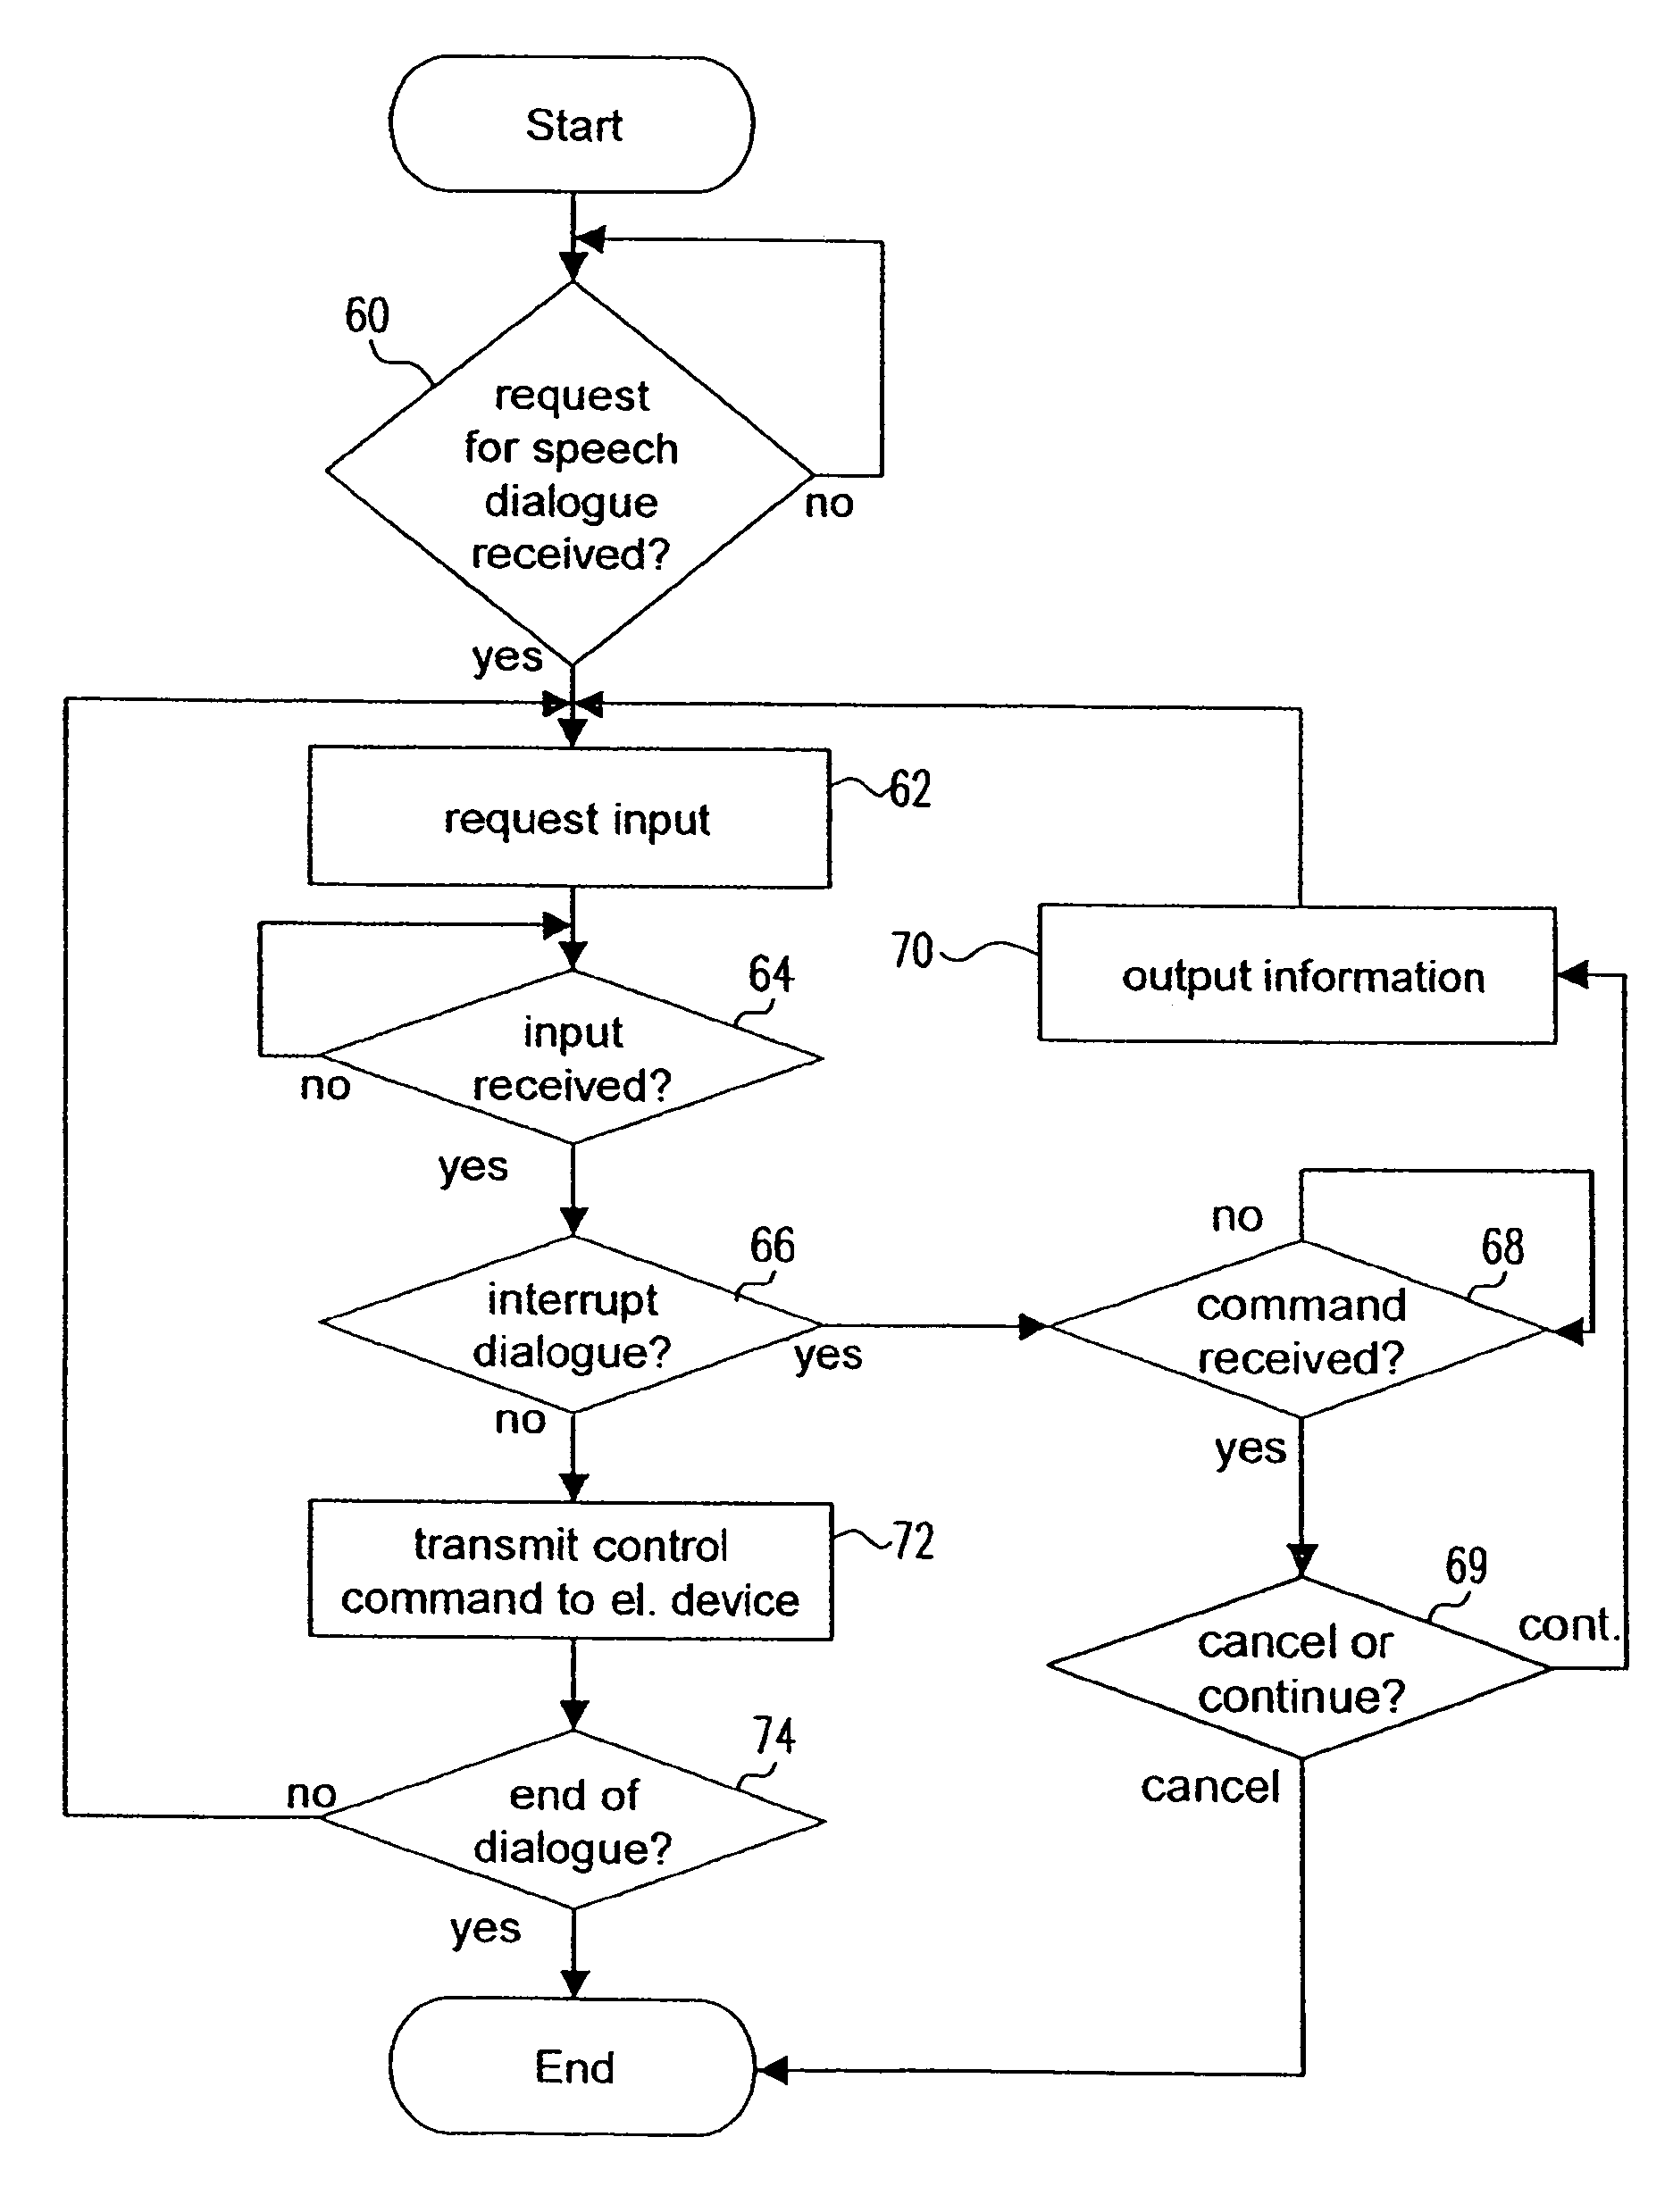 Speech dialogue system for dialogue interruption and continuation control